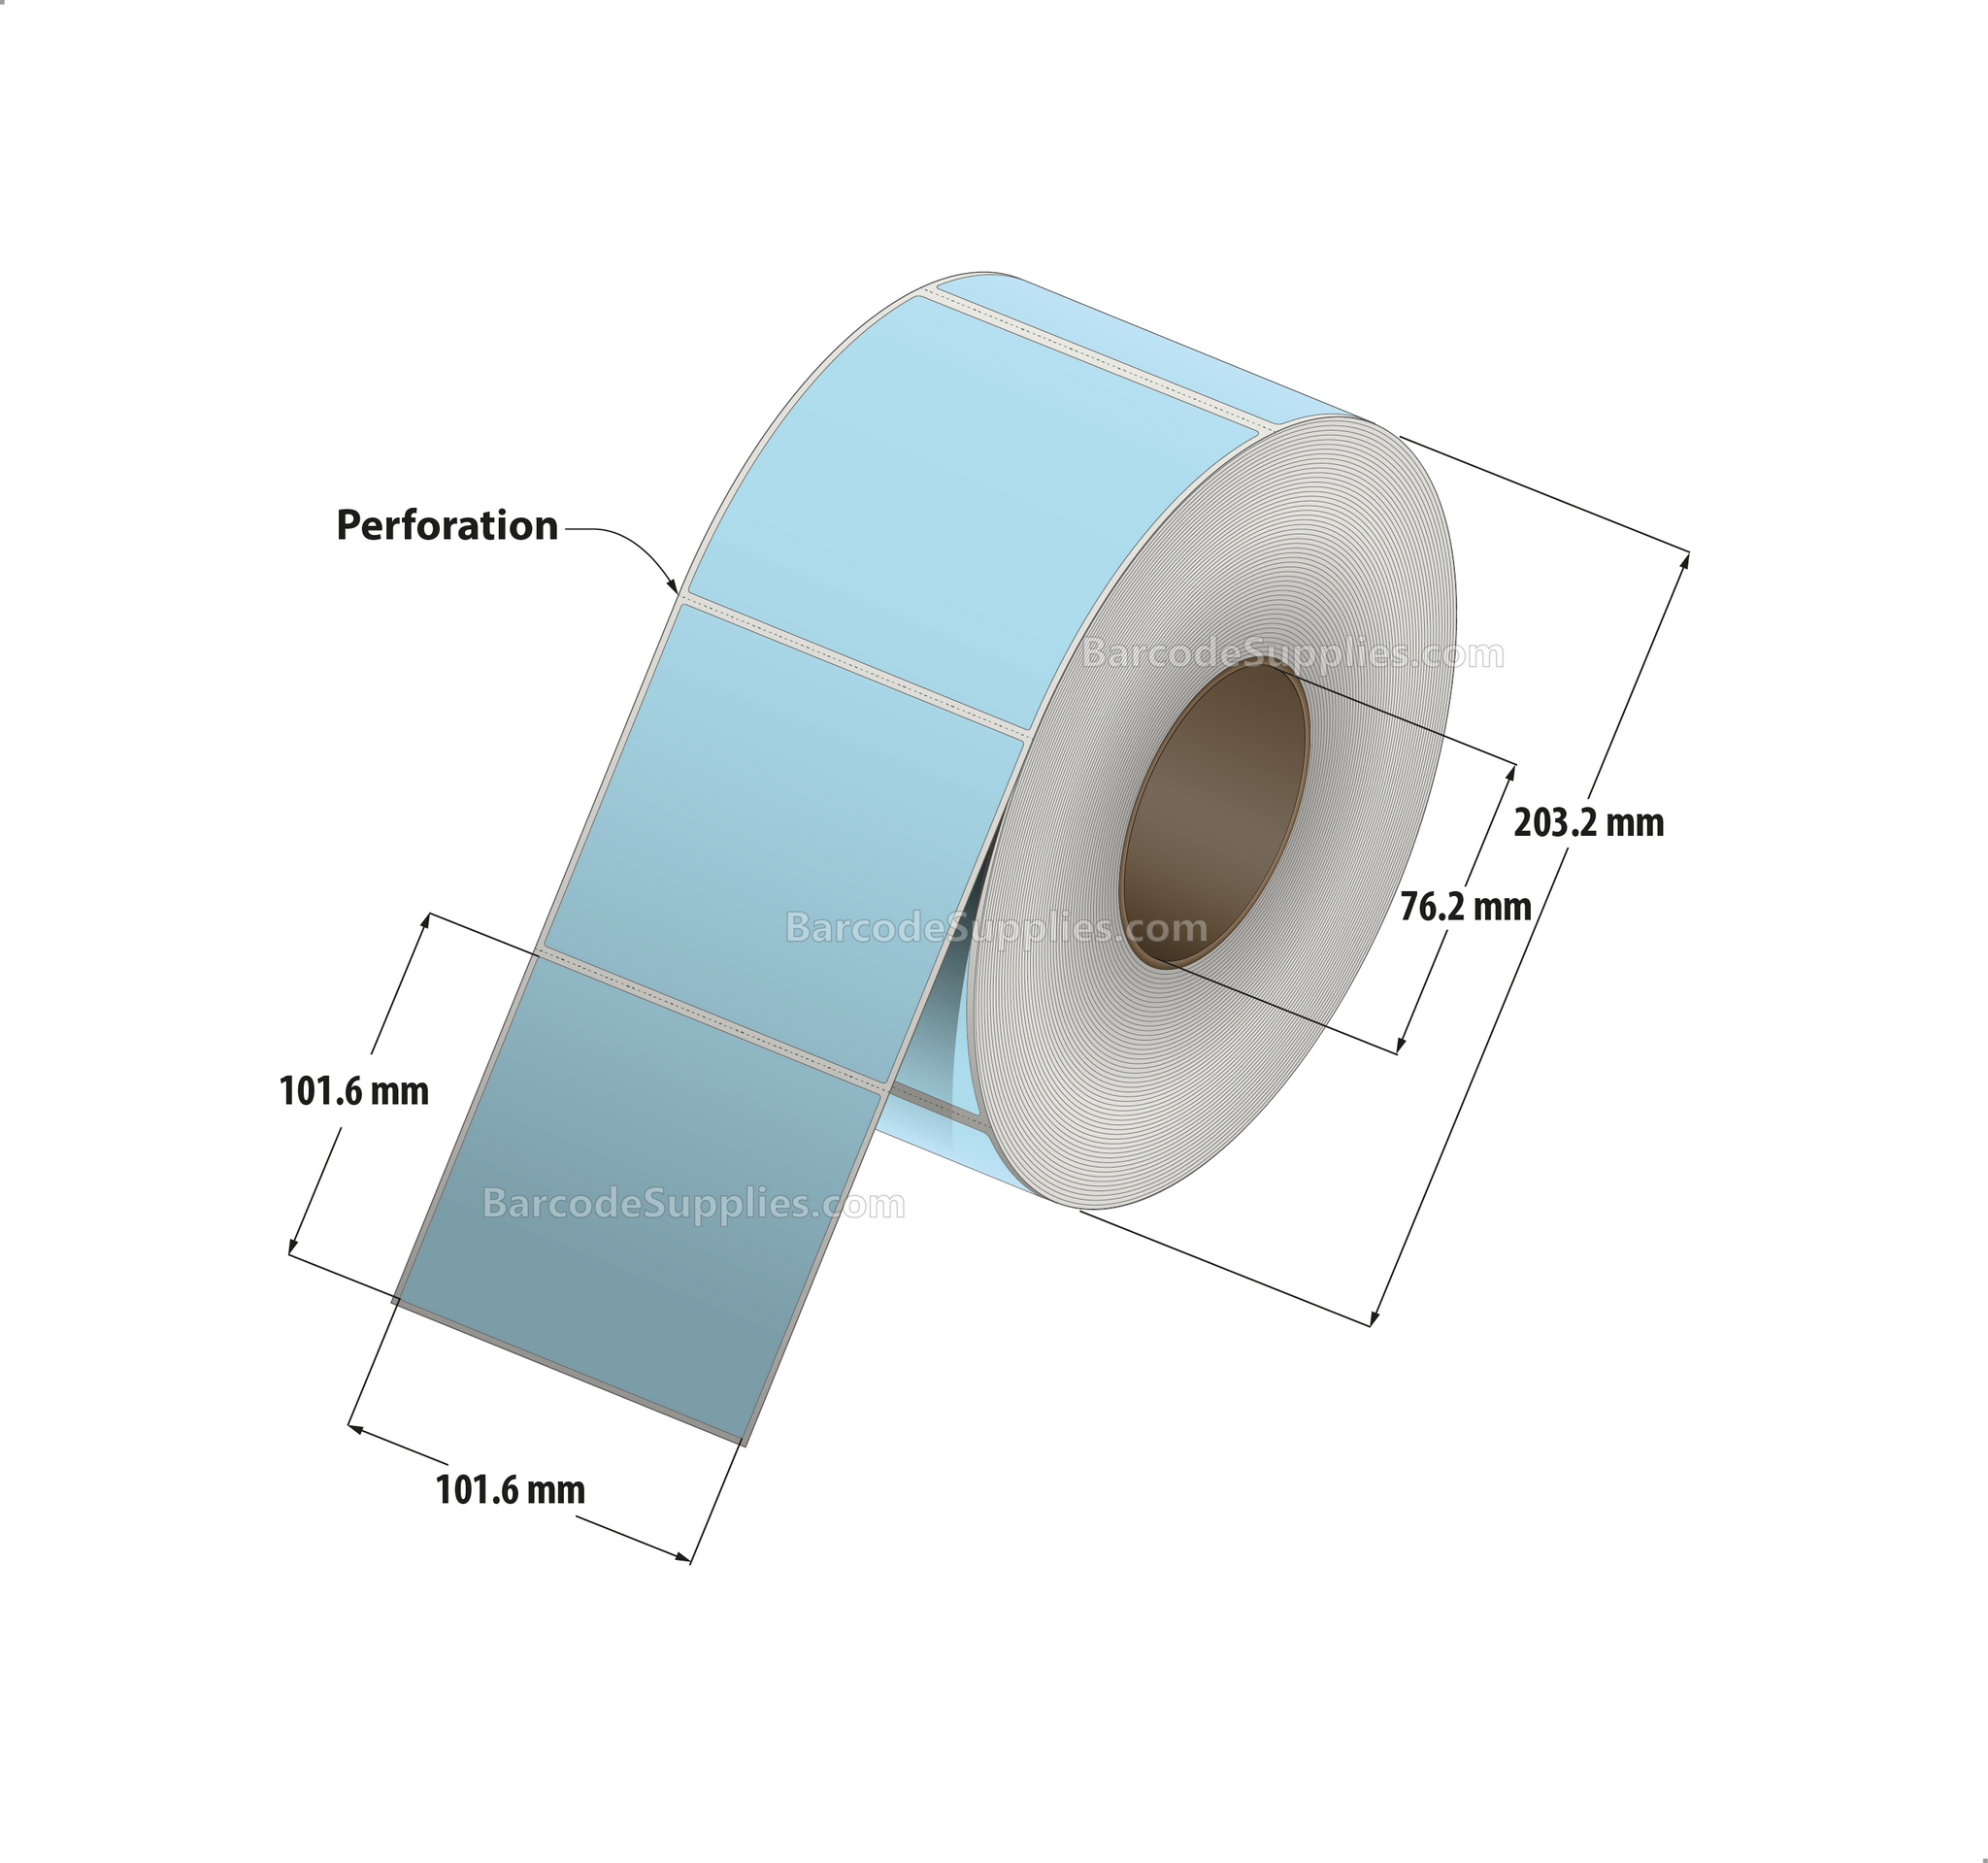 4 x 4 Thermal Transfer 290 Blue Labels With Permanent Adhesive - Perforated - 1500 Labels Per Roll - Carton Of 4 Rolls - 6000 Labels Total - MPN: RFC-4-4-1500-BL